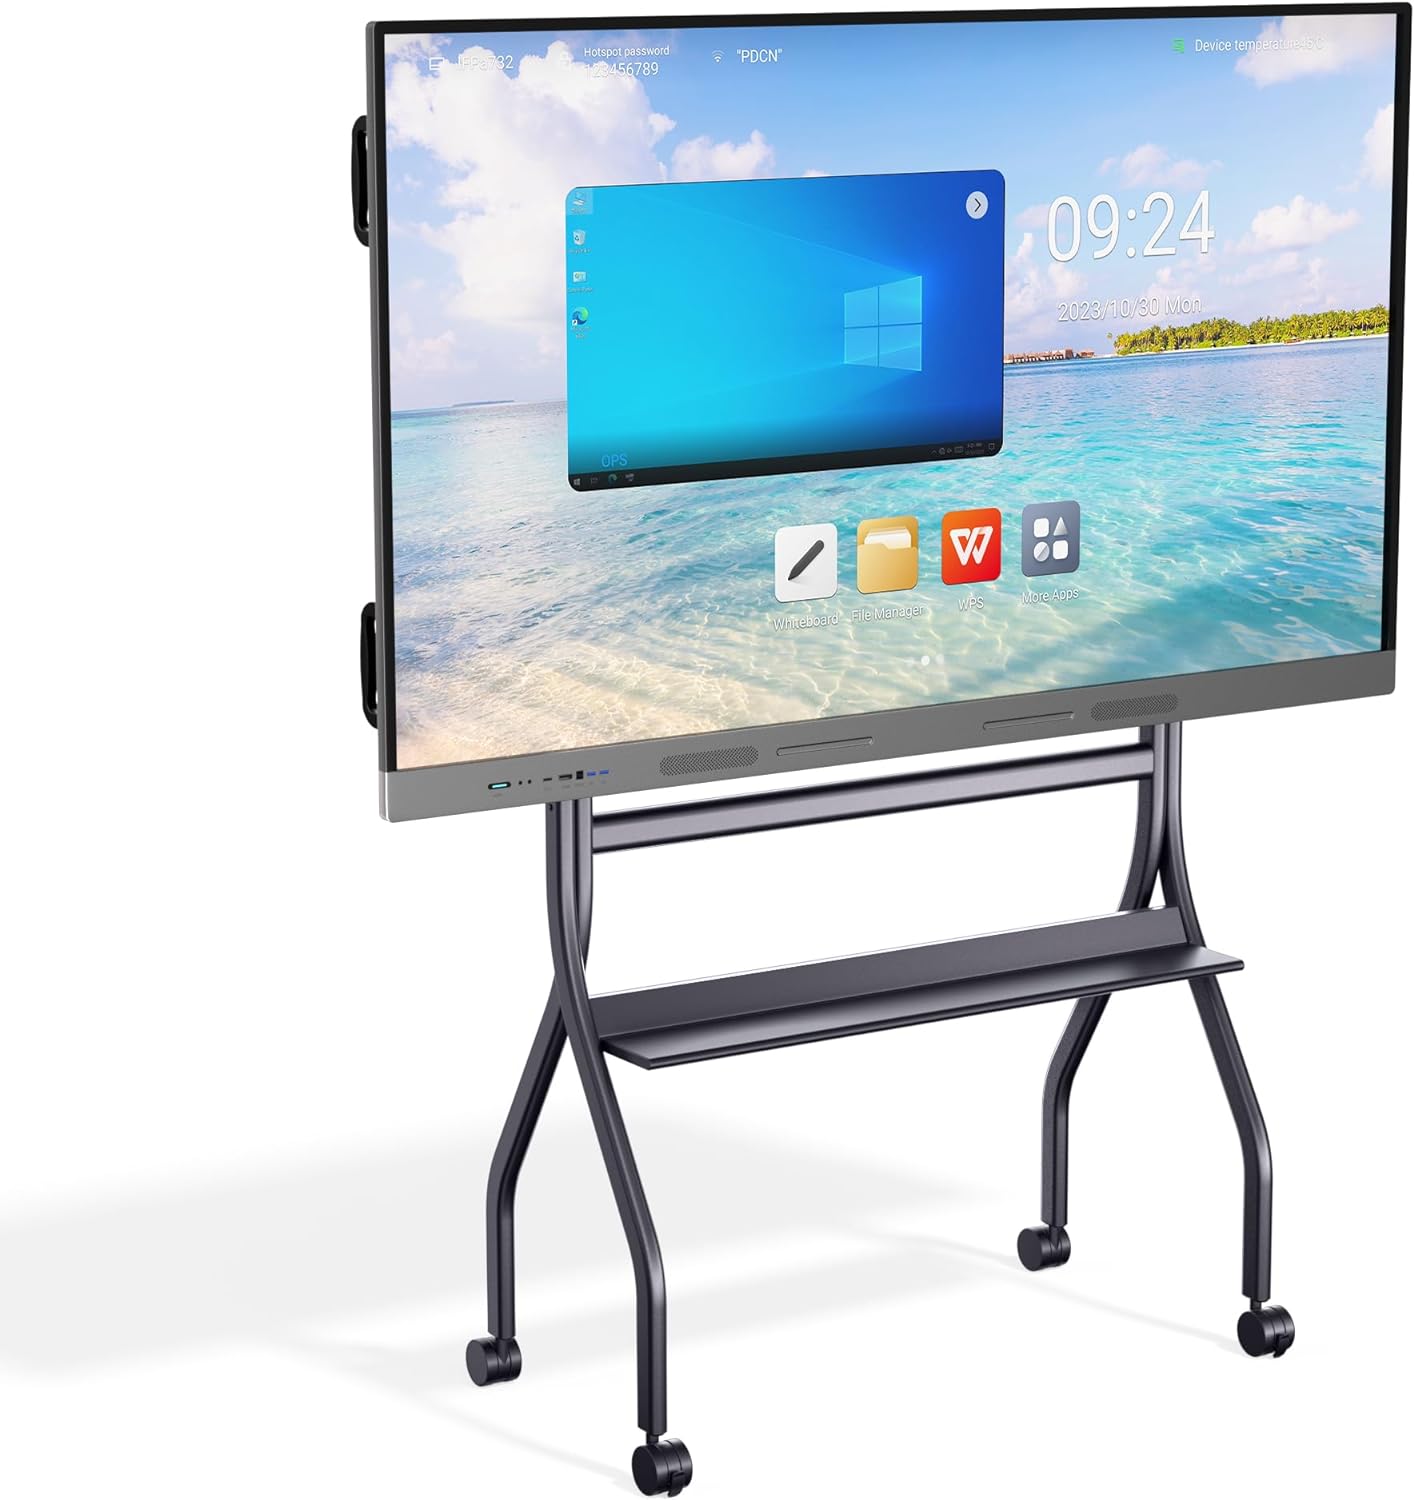 HKMLC 75 Inch Smart Board, 4K UHD Interactive Whiteboard Built-in Dual System Touchscreen Digital Whiteboard, All-in-One Electronic Smart Board for Classroom and Business (Wall Mount Included)